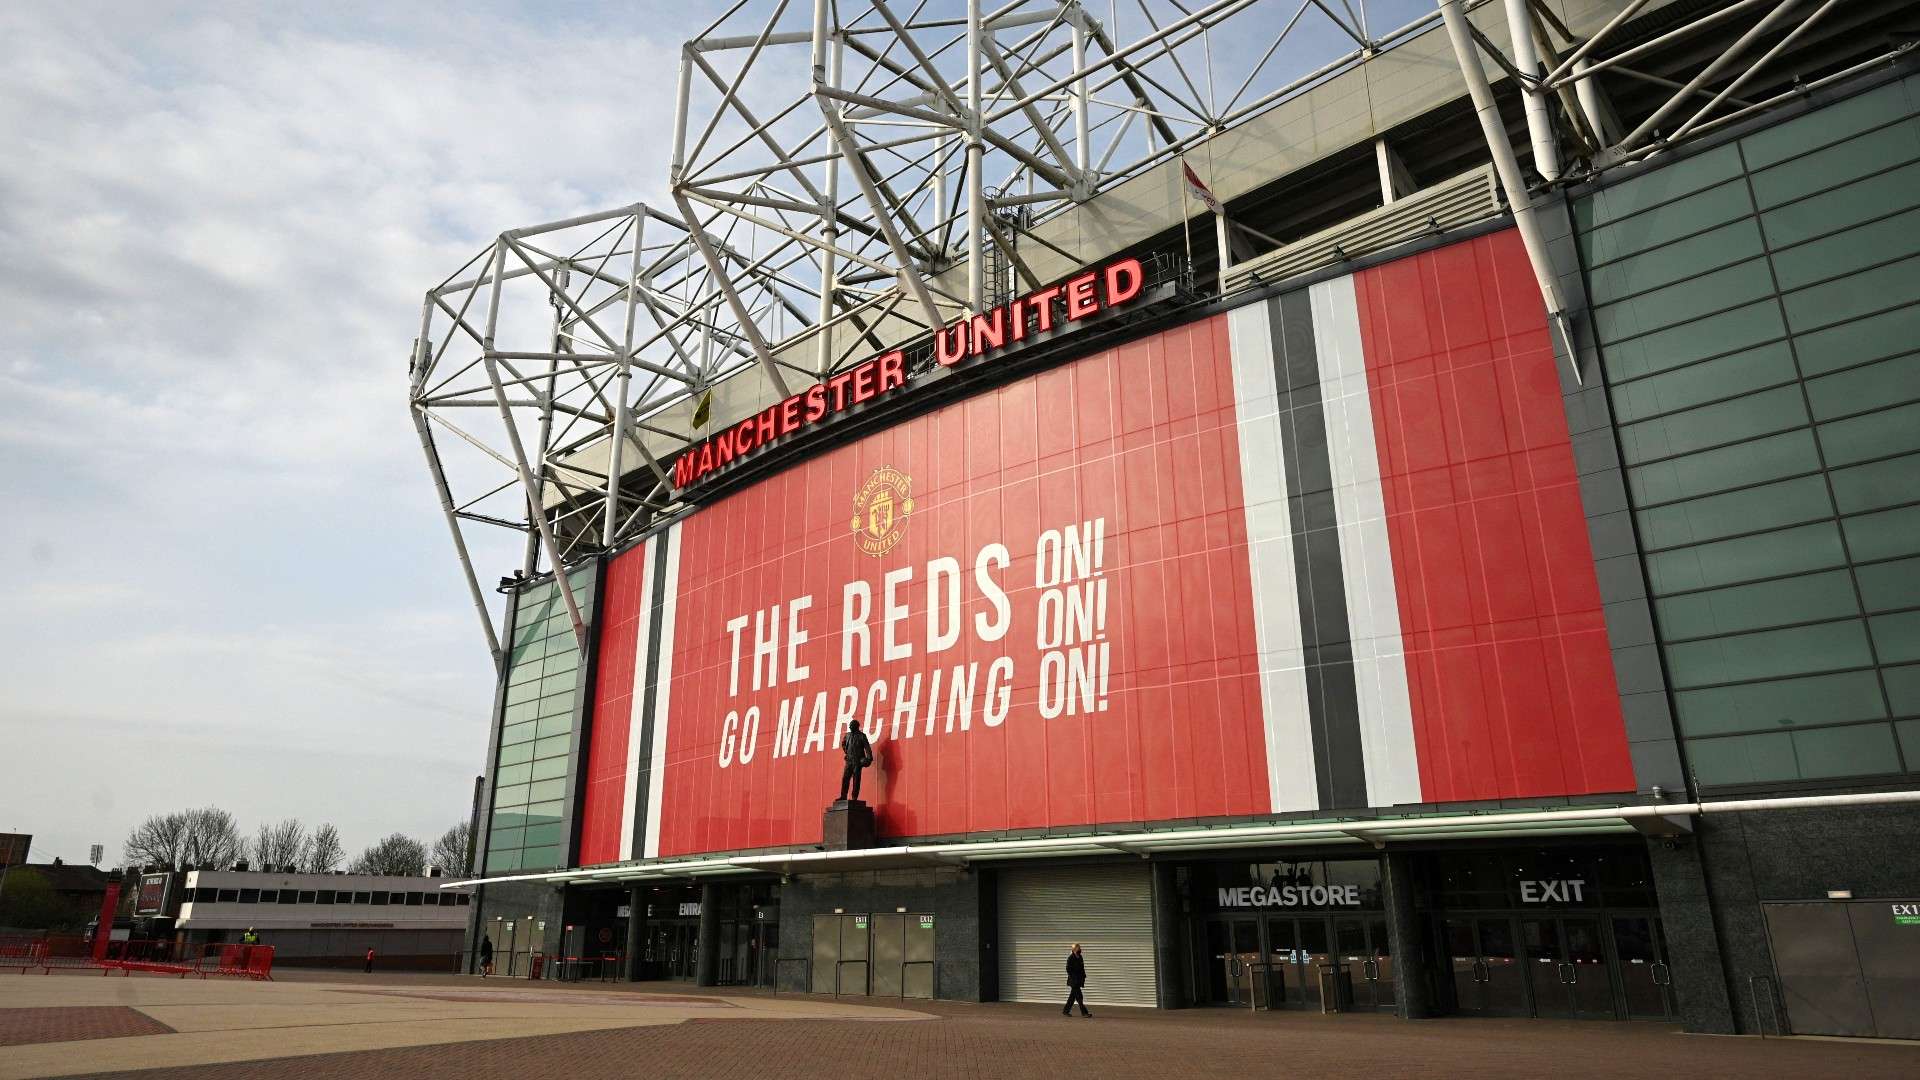 Manchester-United-Liverpool-202105060830